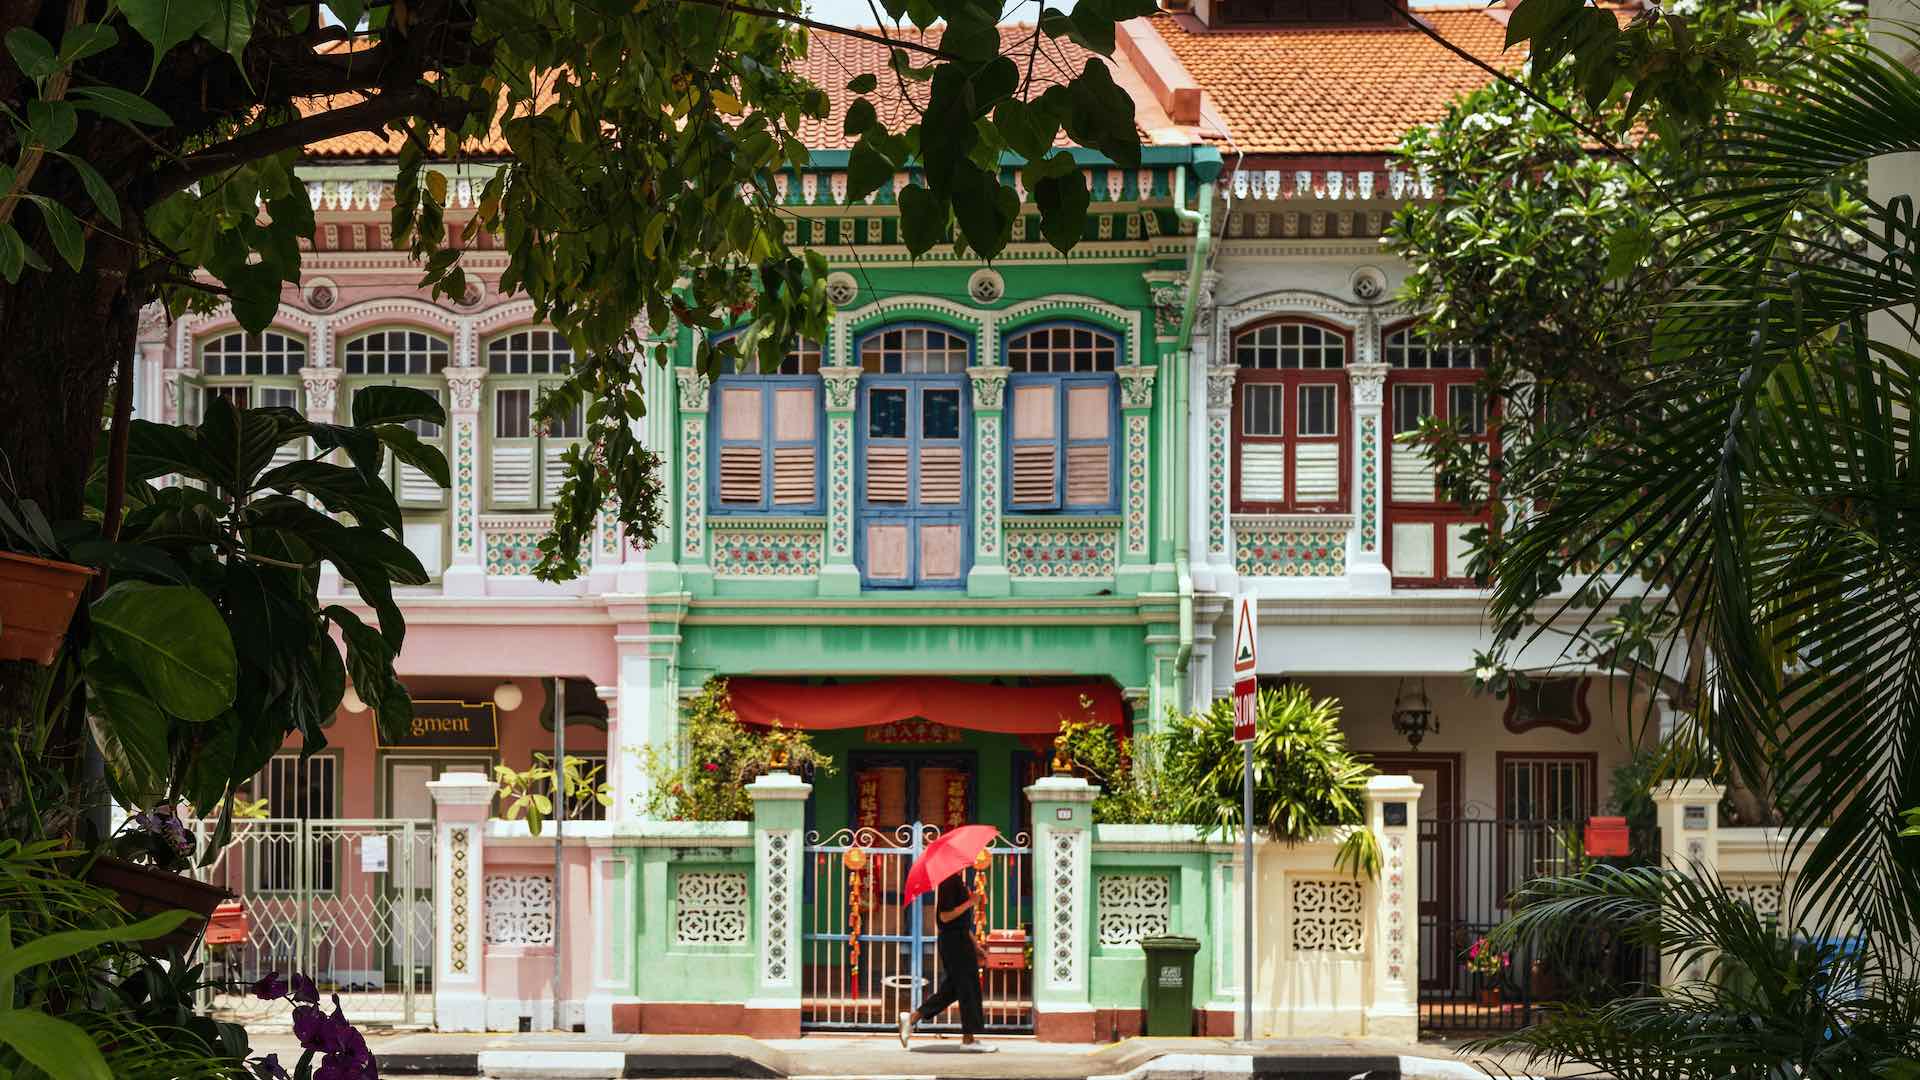 A Guide to the Hidden Gems to Seek Out in Singapore if You've Already Seen the Touristy Sights